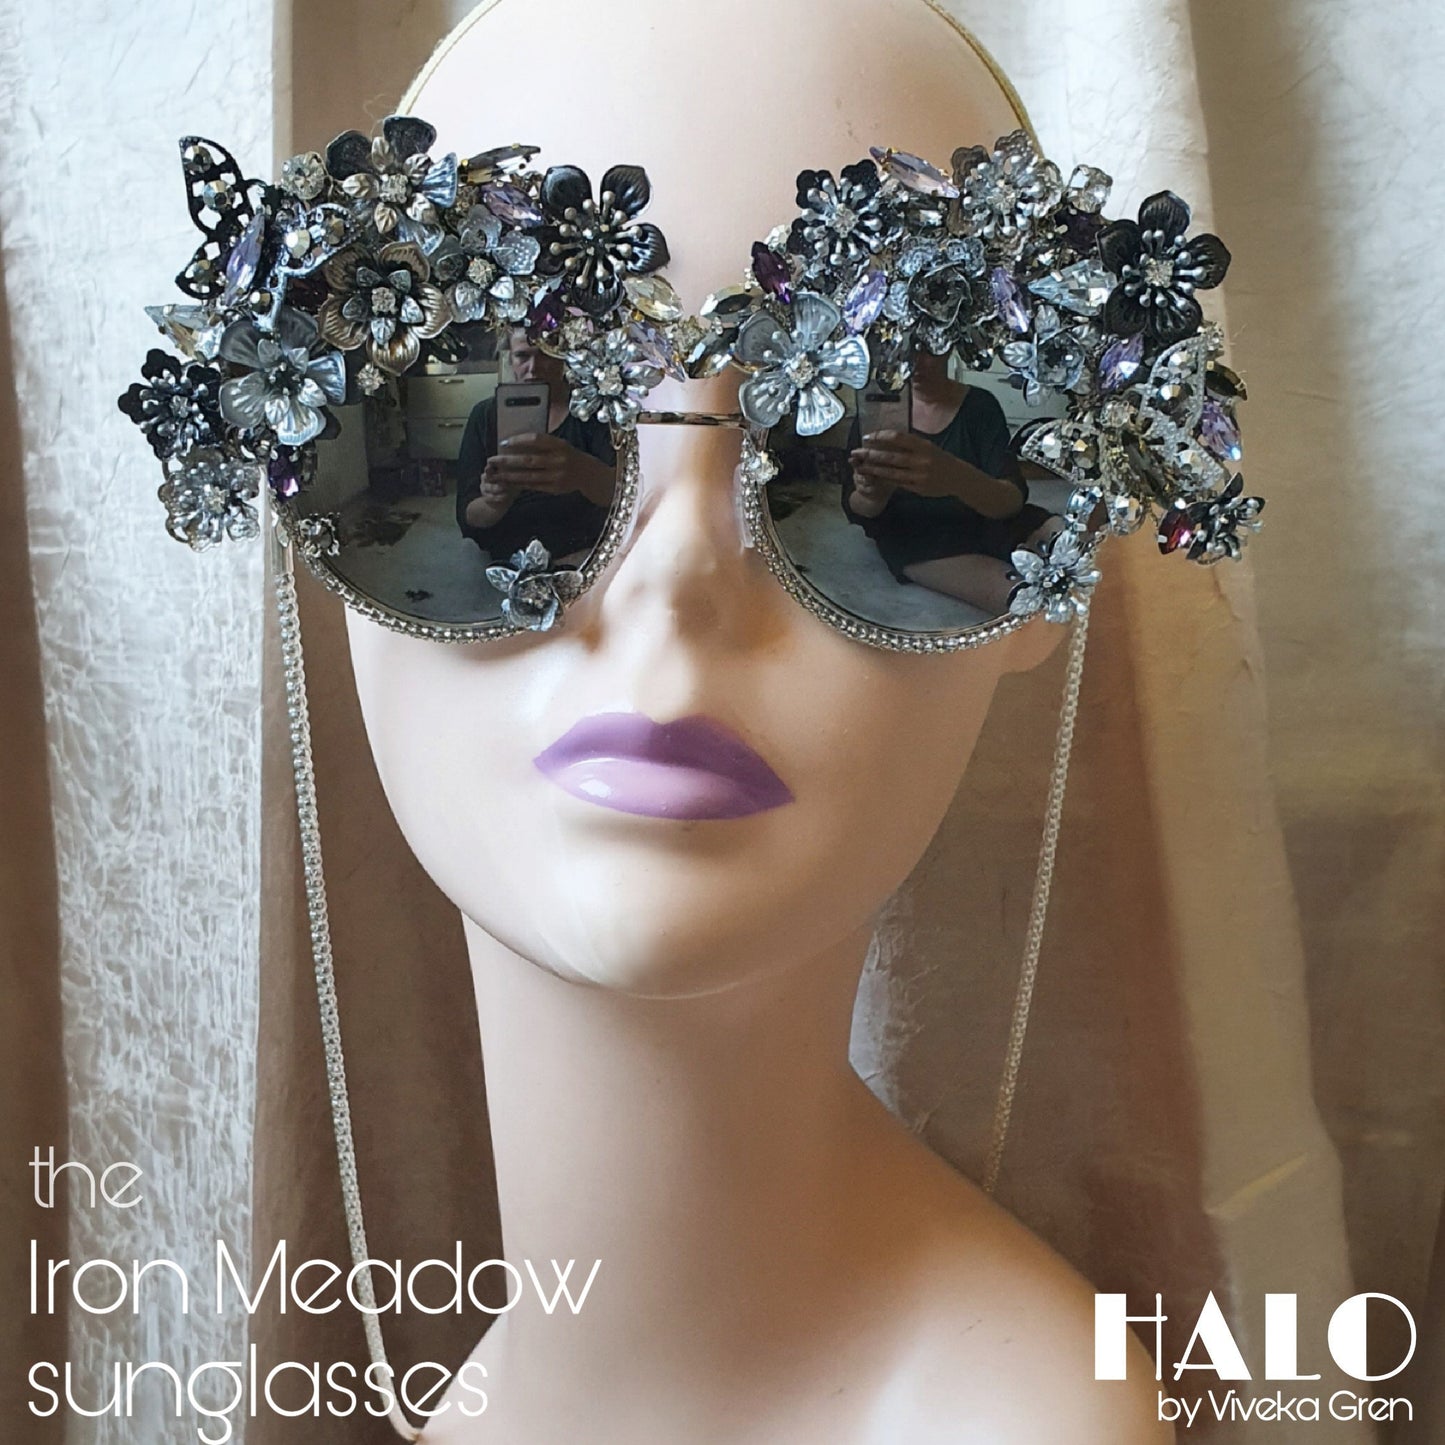 Meadows couture collection: The Iron Meadow sunglasses